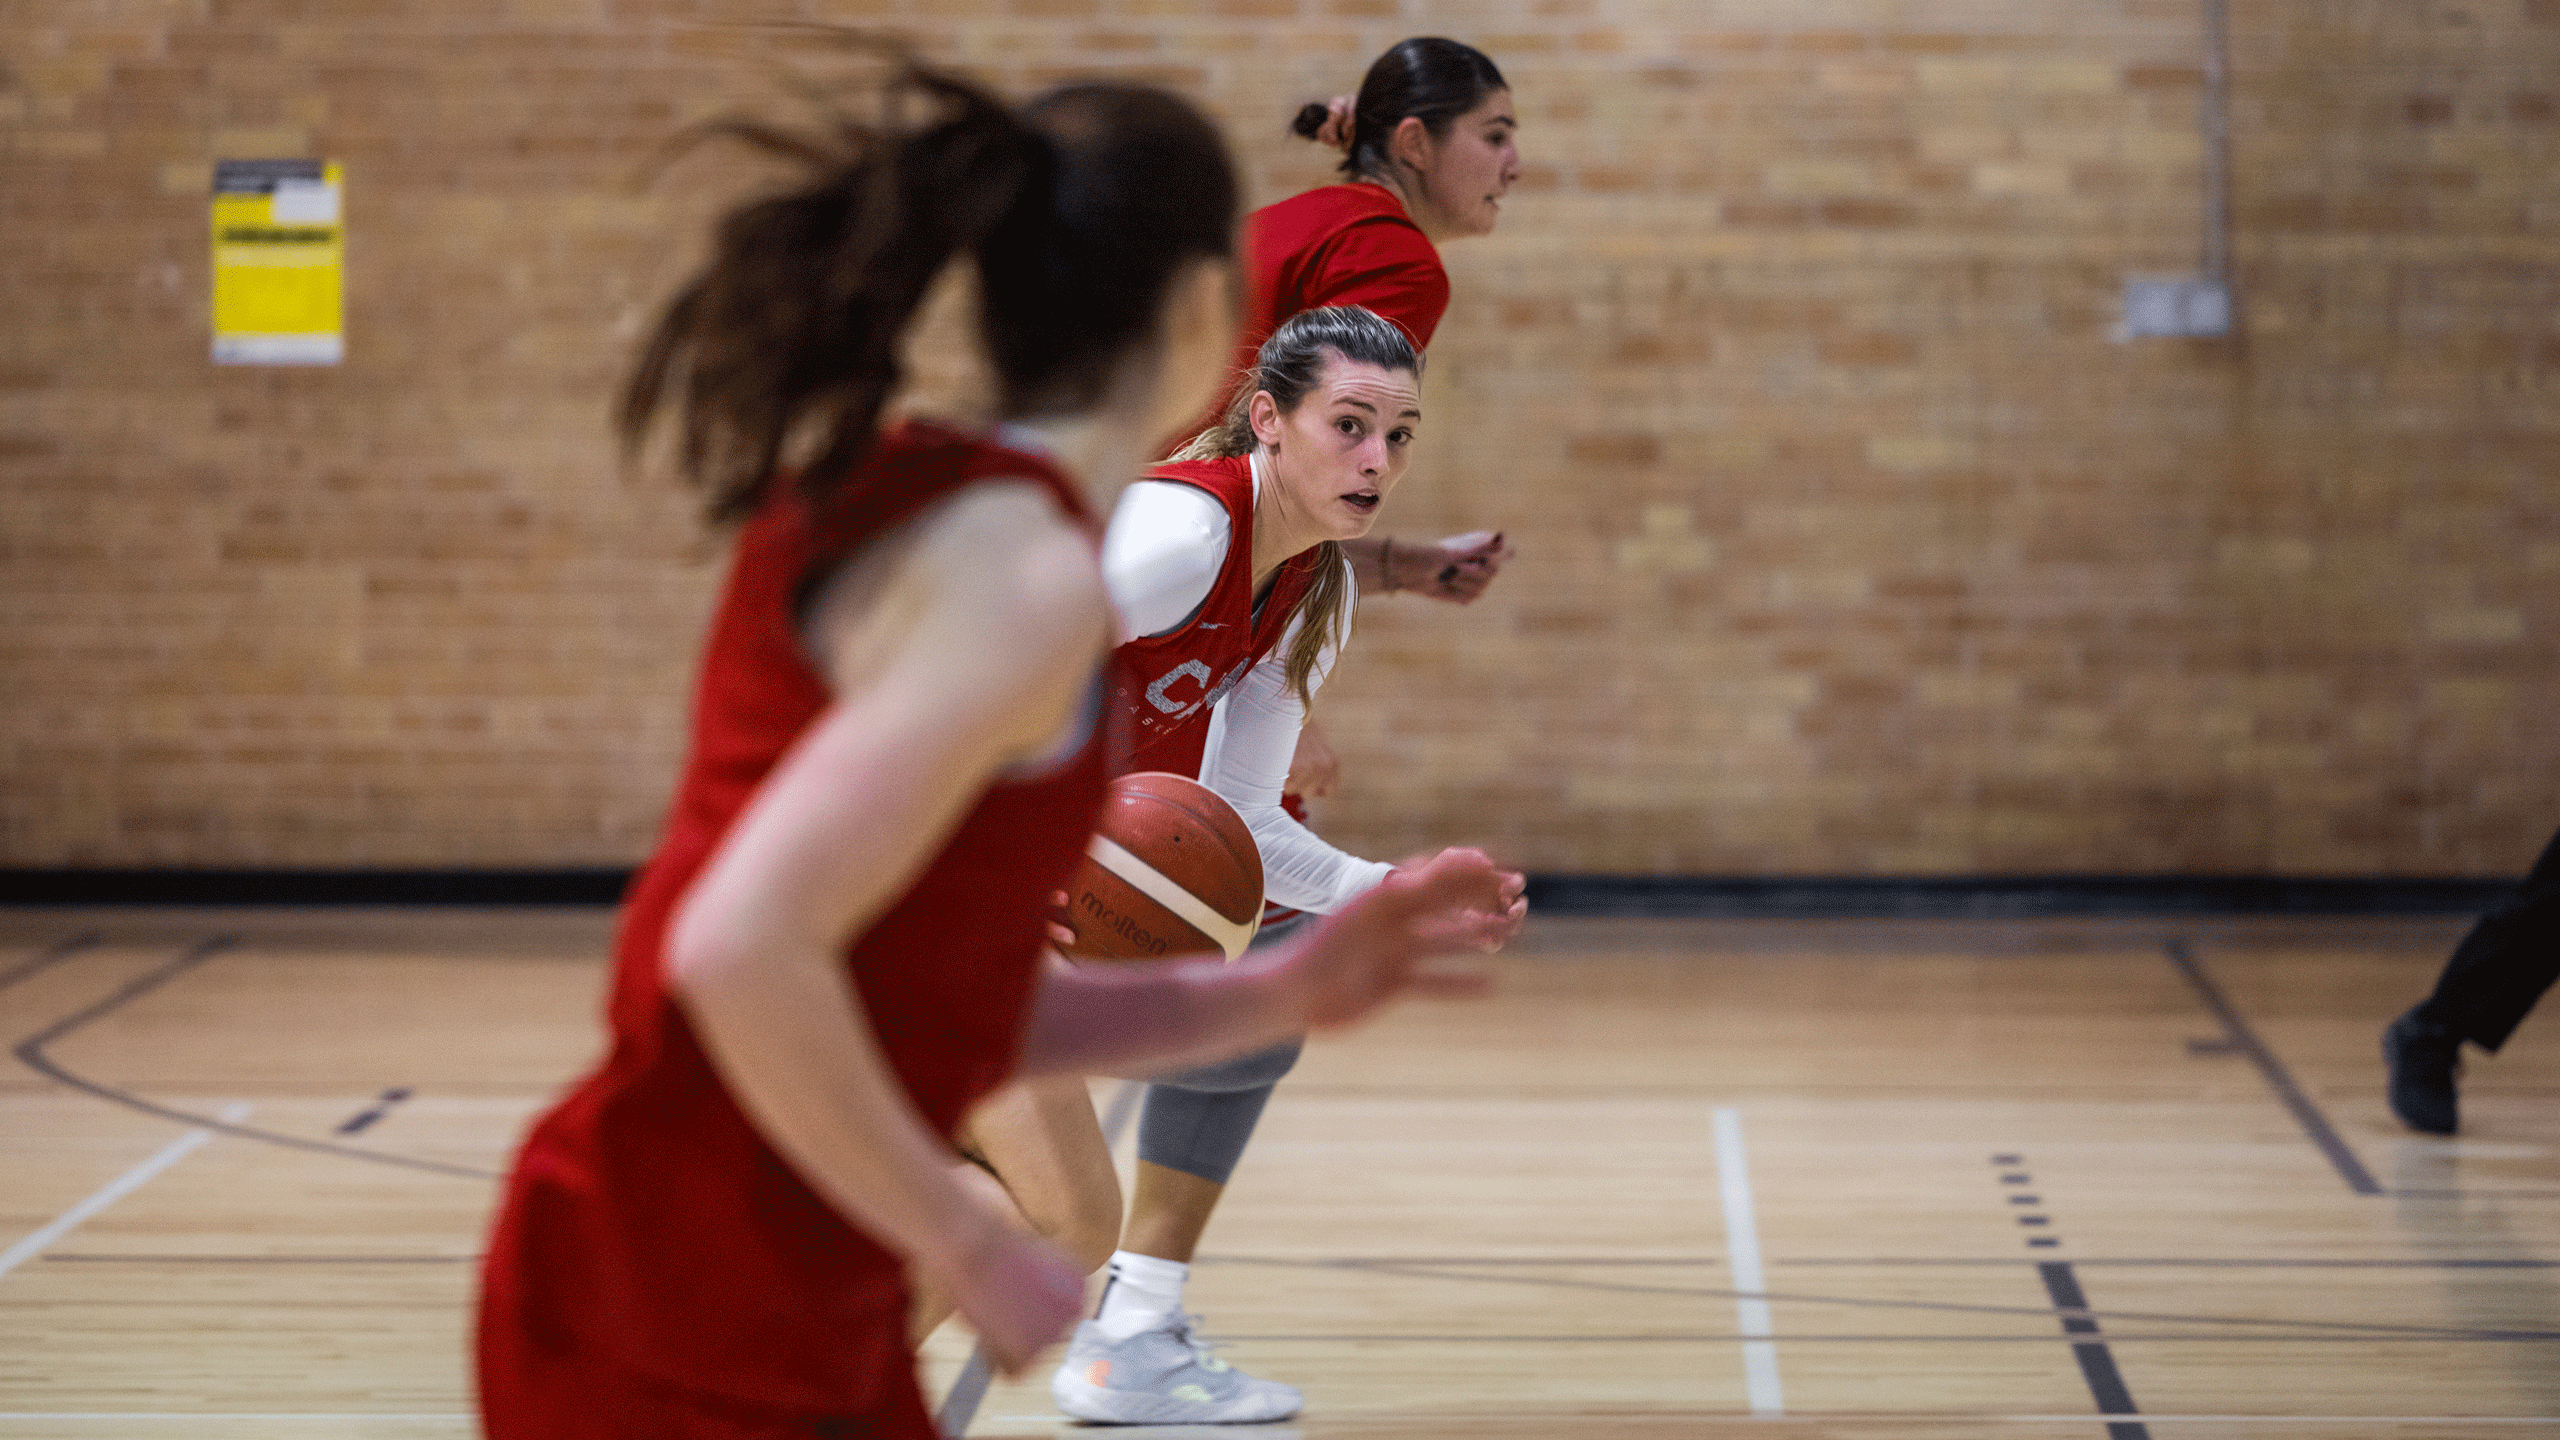 A basketball player in a red jersey runs down